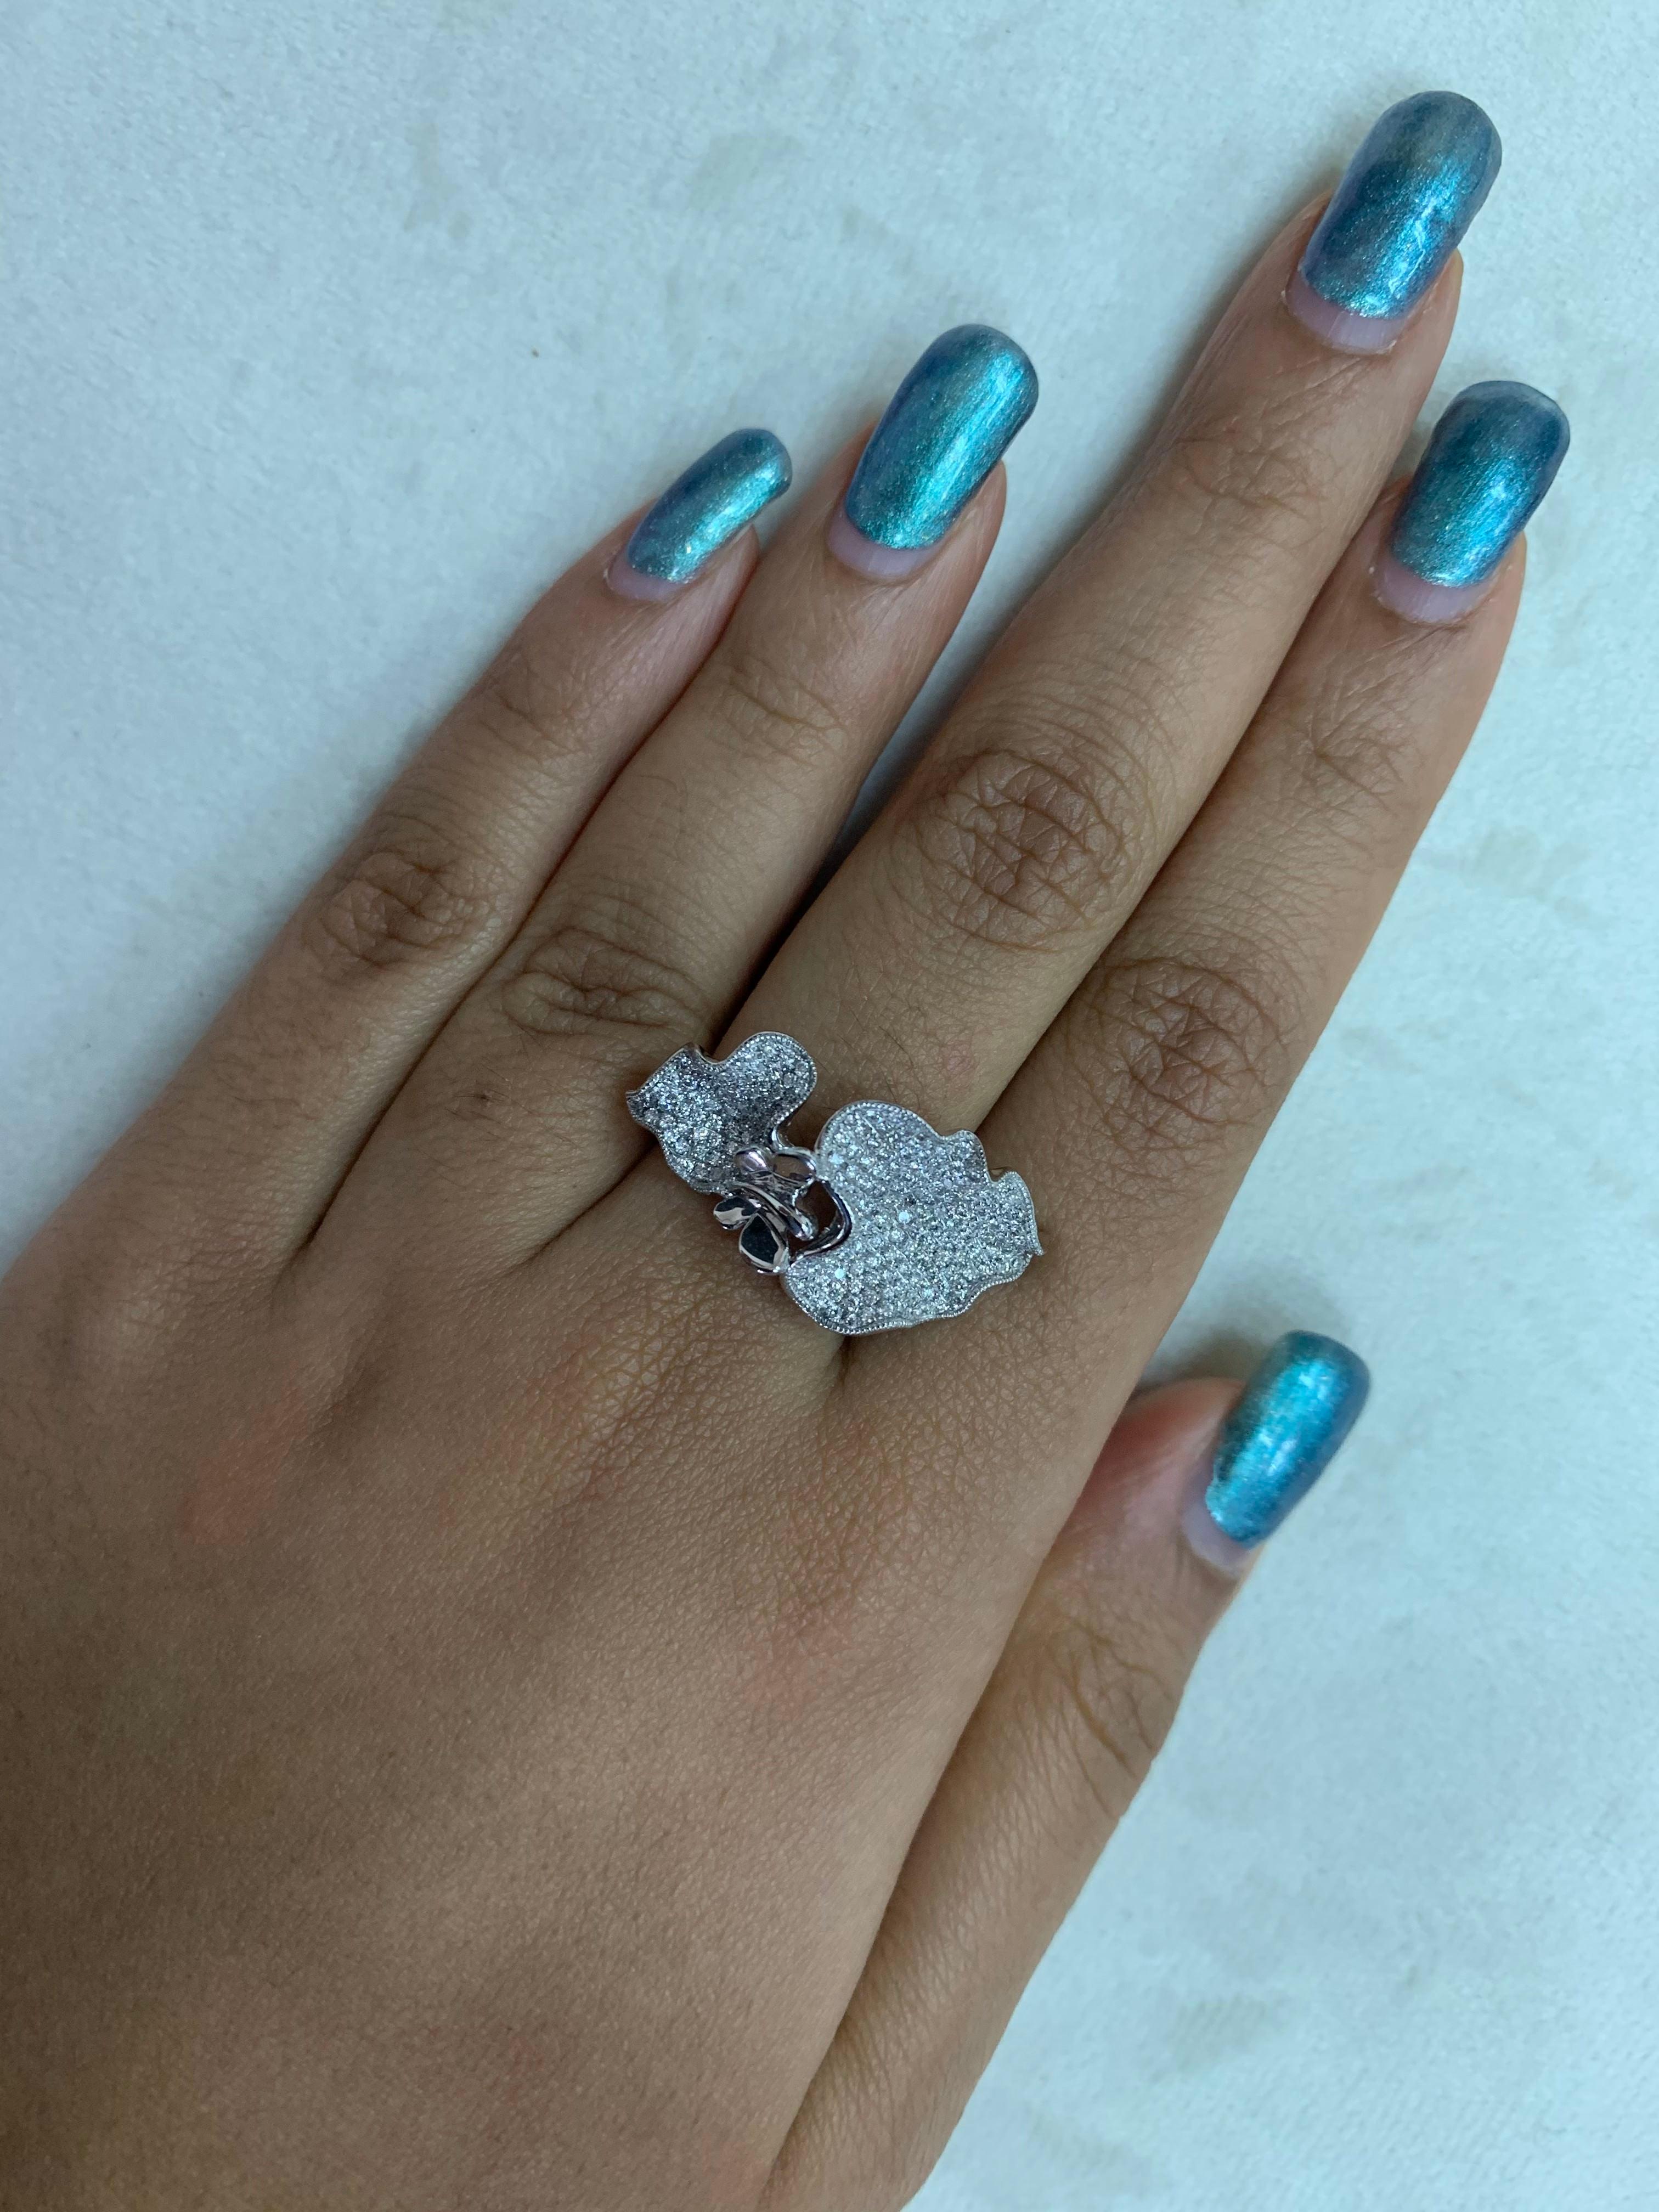 Made by nature over a period of time and under great pressure, diamonds are a beautiful reminder that all things great take time. There is a reason why diamonds are a girl’s best friend, and it’s because there is never a wrong occasion to